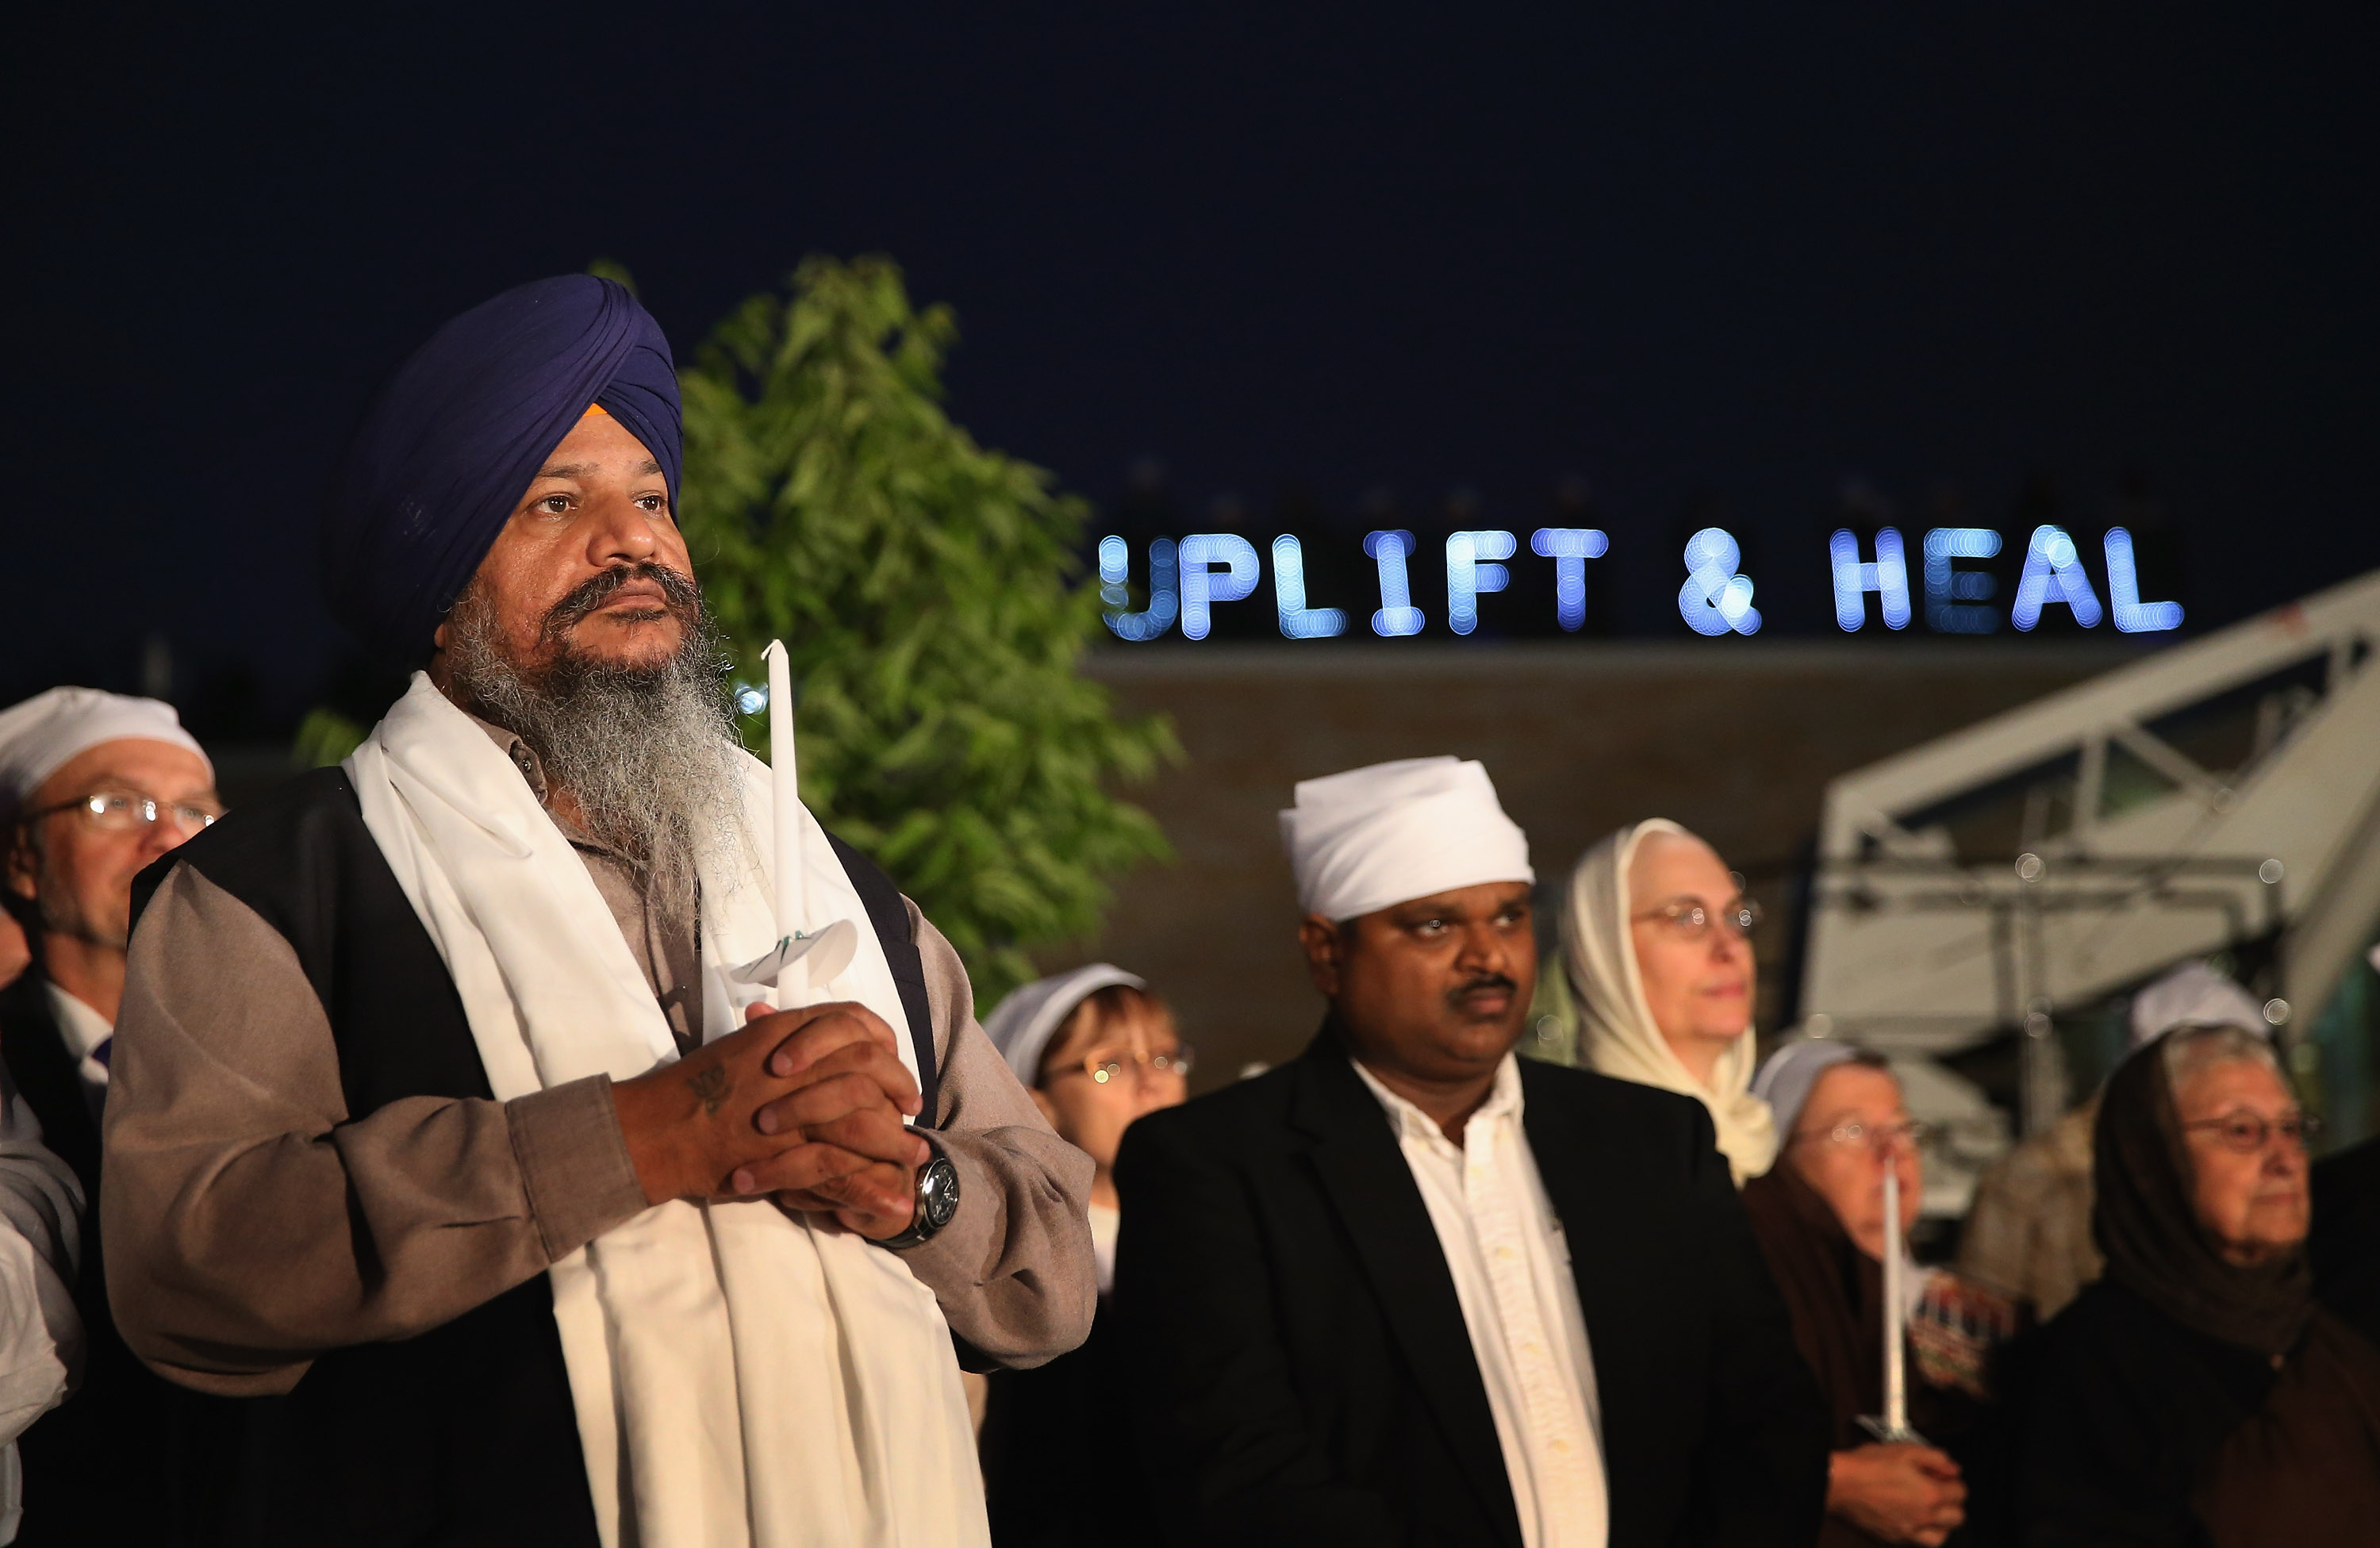 Members of the Sikh Temple of Wisconsin and supporters attend a vigil to mark the anniversary of the August 5, 2013 shooting at the temple, when white supremacist Michael Page killed six members. HuffPo’s Asian Voices, which launched in the spring of 2017, has featured coverage of anti-Sikh hate crimes